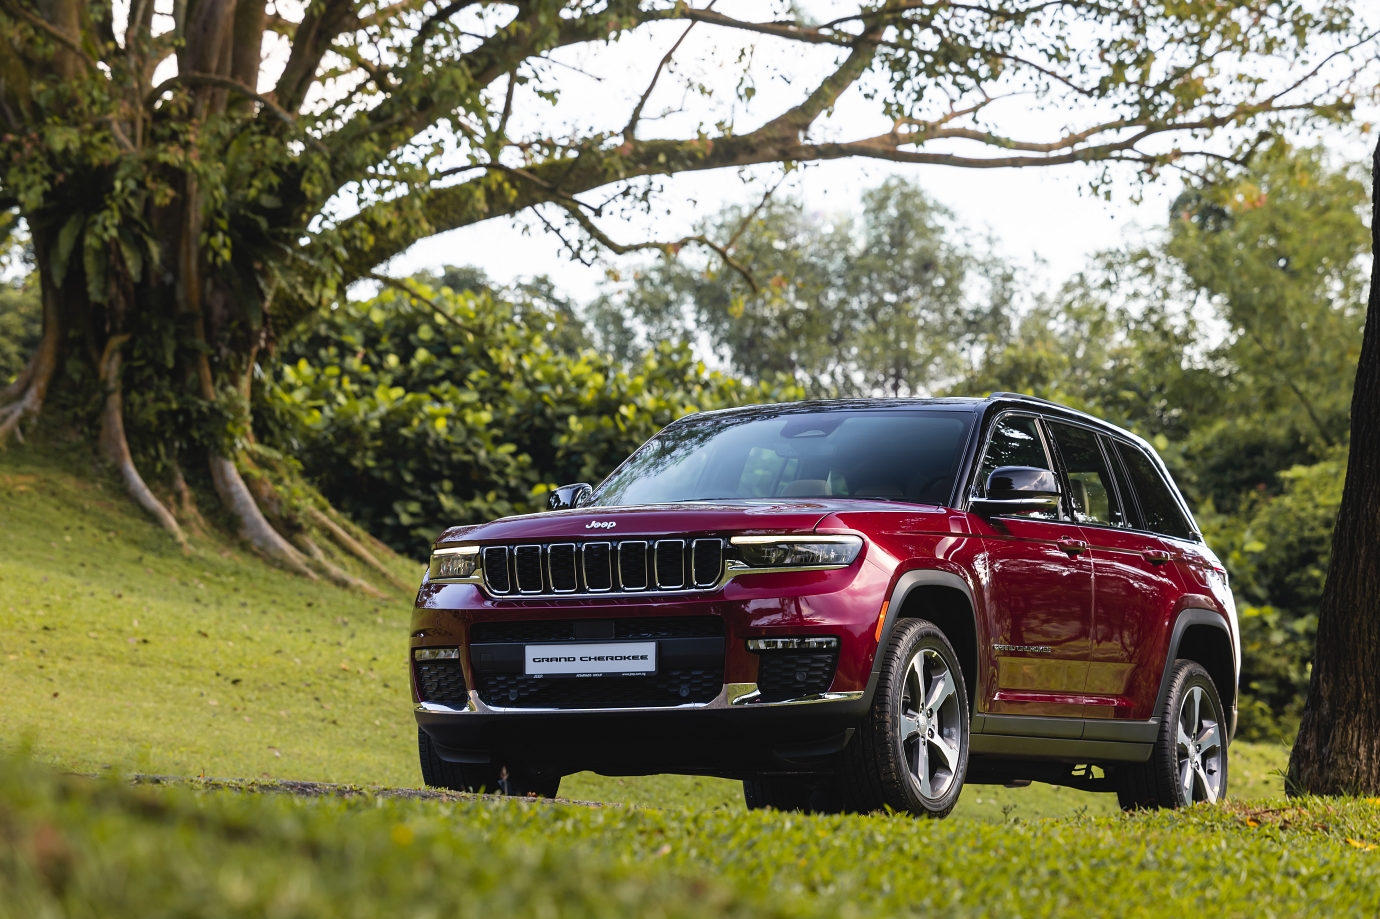 jeep, chrysler, grand cherokee, capella auto launches the all-new fifth generation jeep grand cherokee in singapore